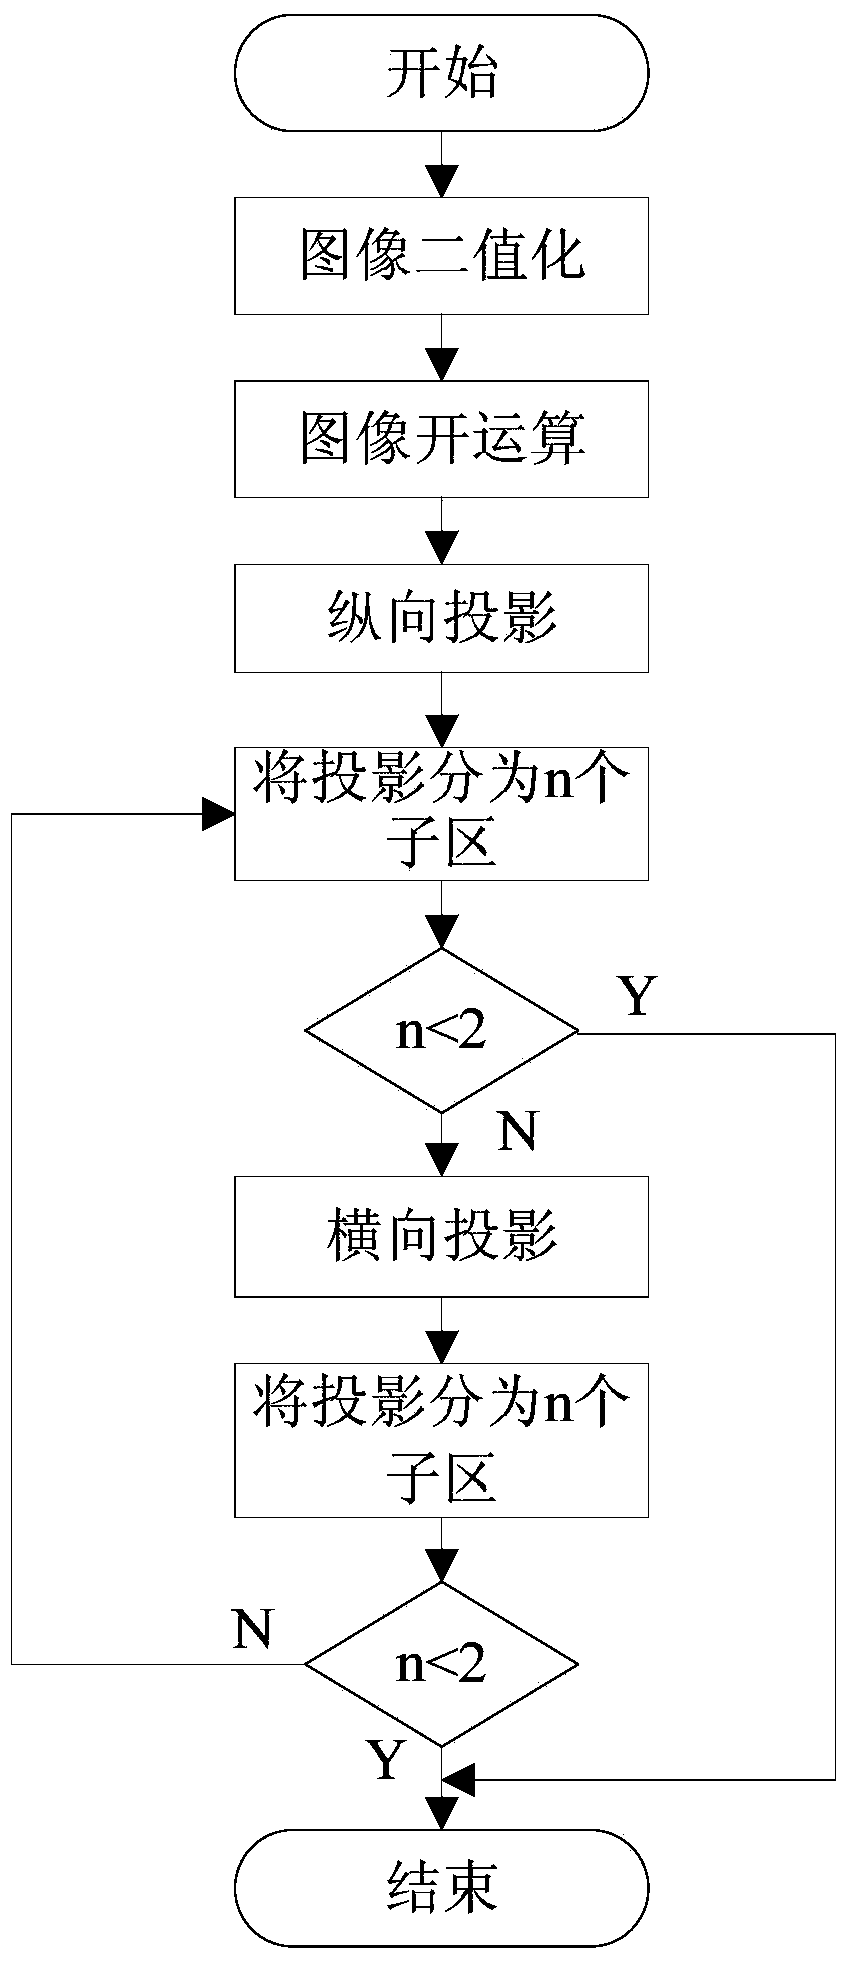 A Connected Domain Labeling Method Based on Projective Transformation